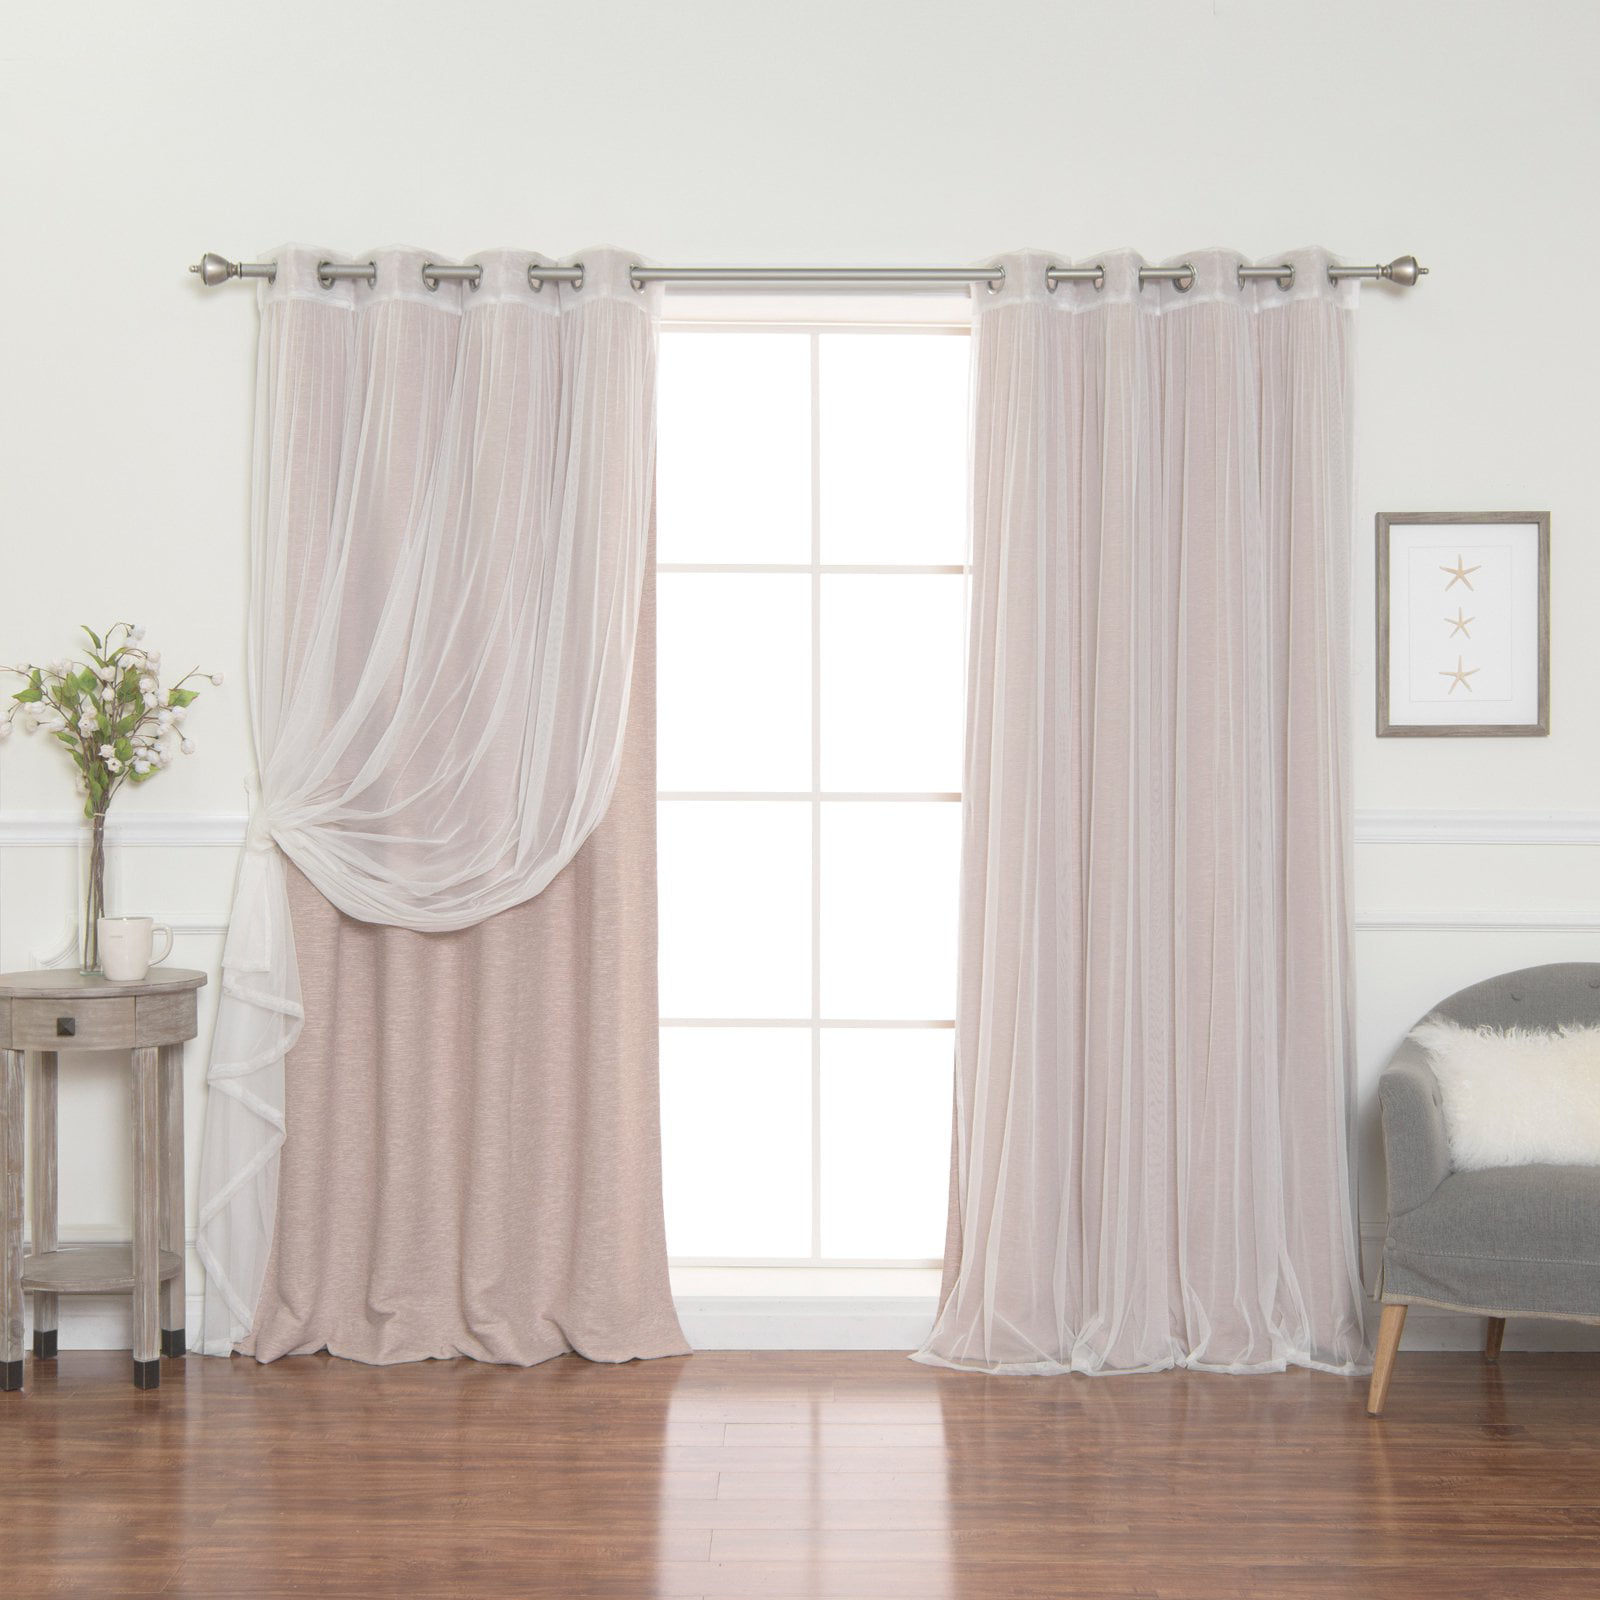 Best Home Fashion Sheer and Blackout Mix and Match Curtains - Walmart.com